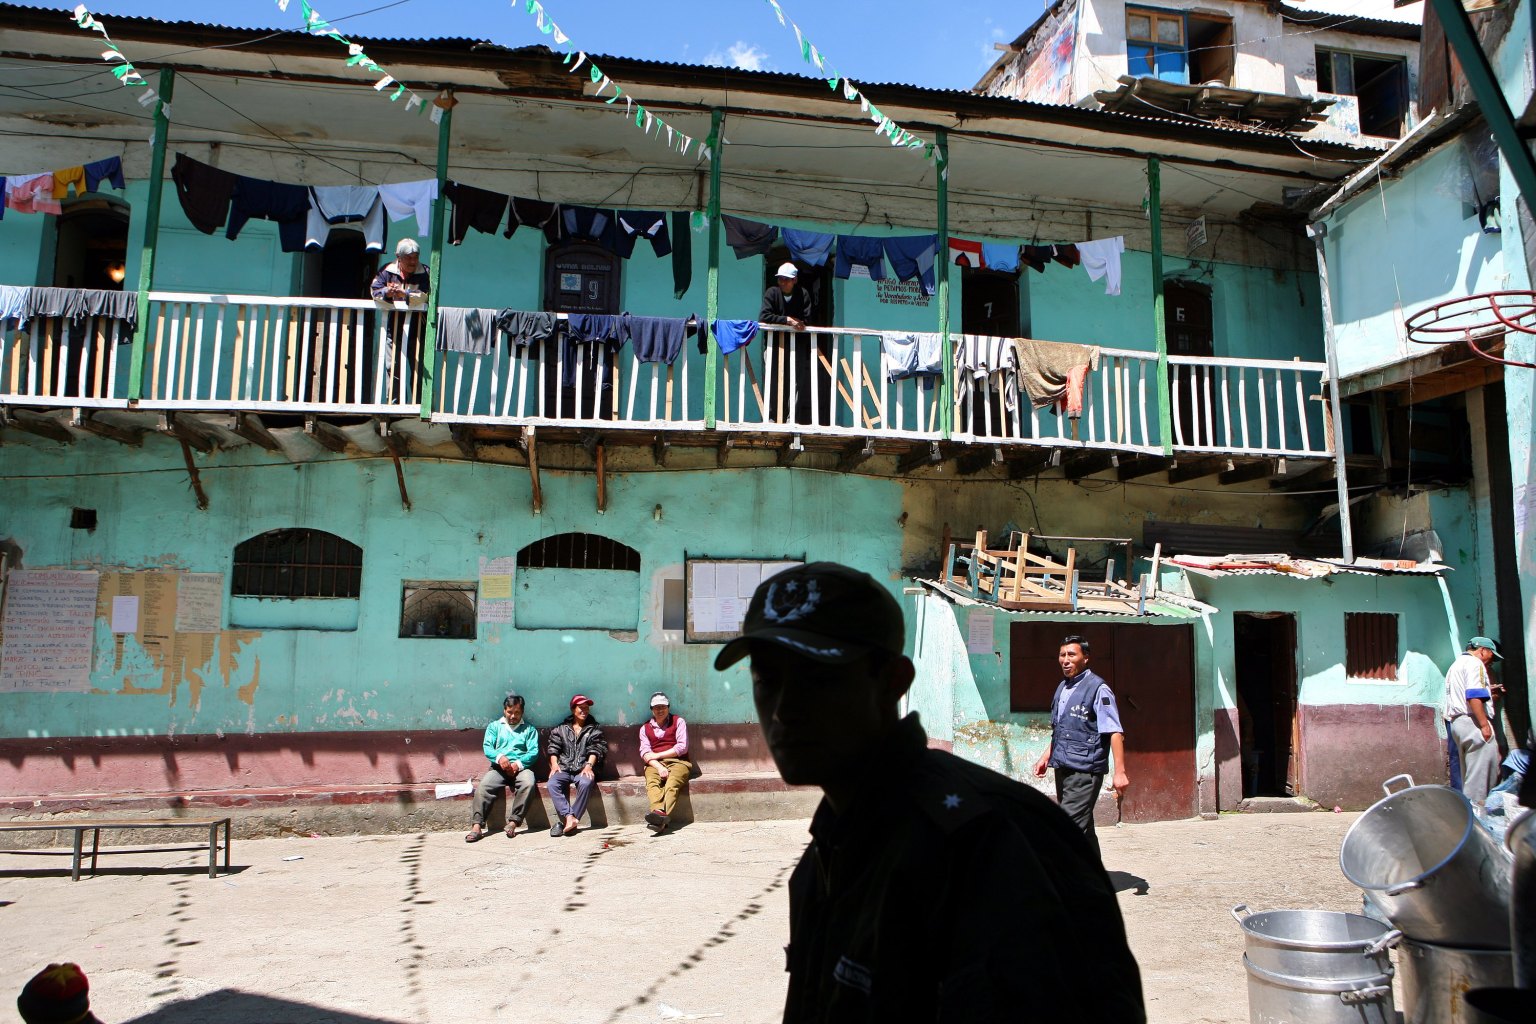 Bolivia’s largest prison has a society within itself and no guards inside the walls. Inmates elect their own leaders, make their own laws, get jobs to pay for their cell’s rent, and can even live with their families.